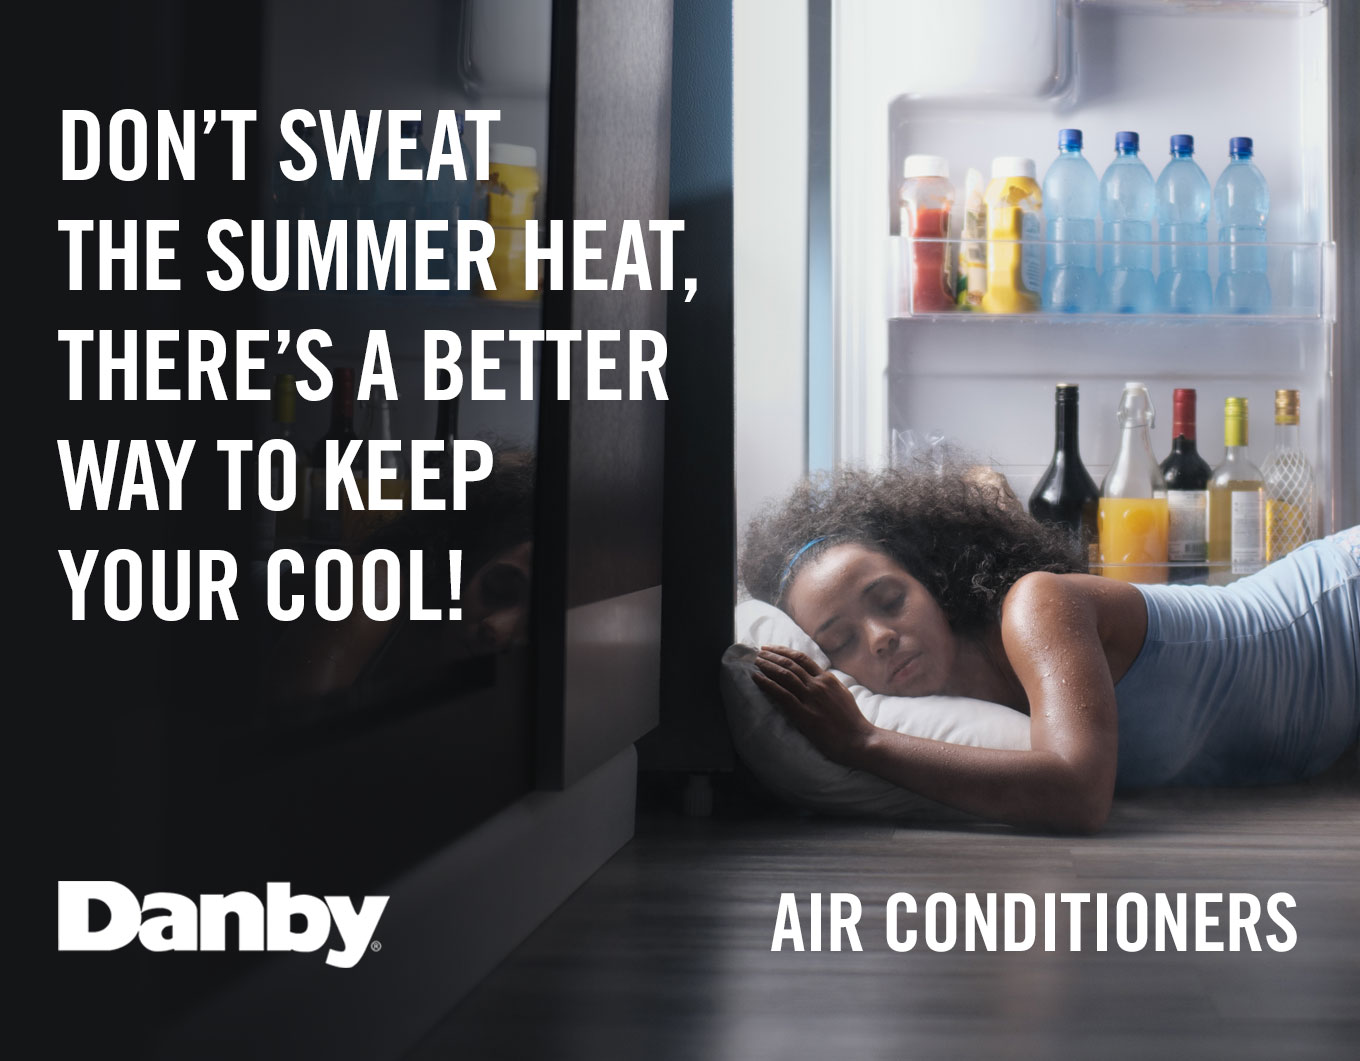 Don't sweat the summer heat, there's a better way to keep your cool!